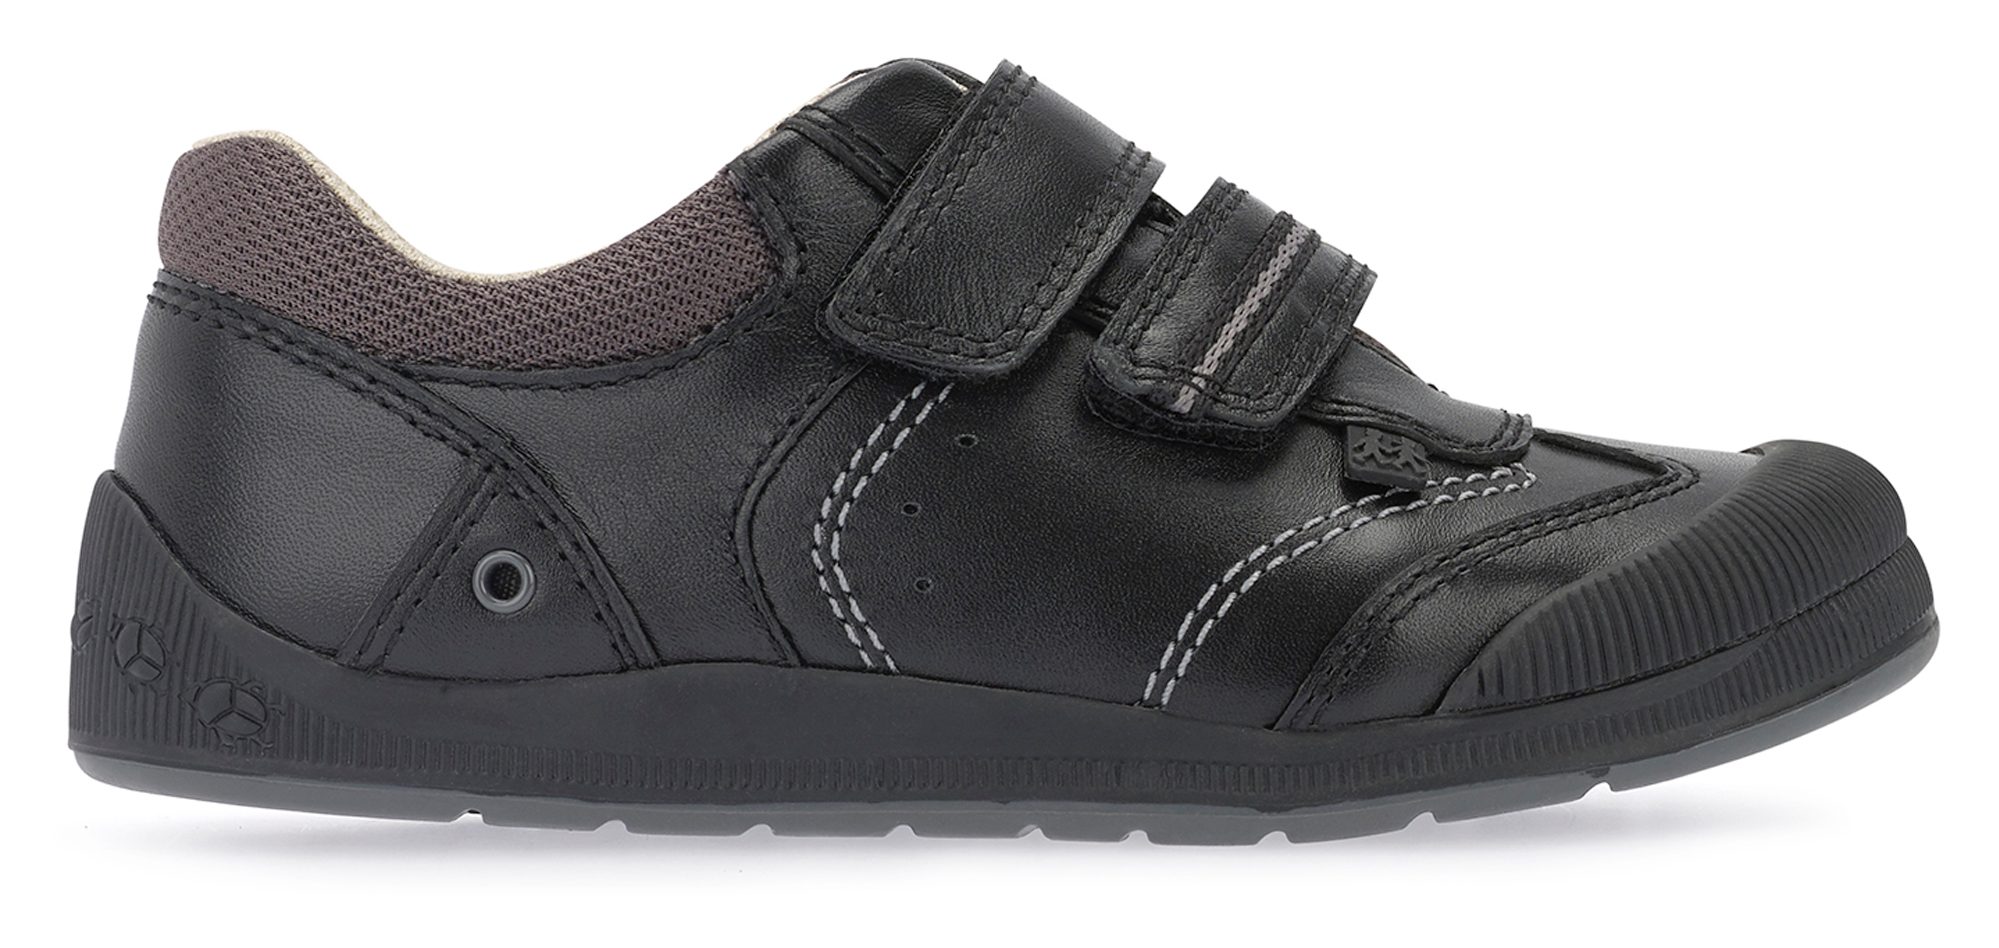 Start-Rite Tough Bug First Black Leather 0754_7 - Boys Shoes ...